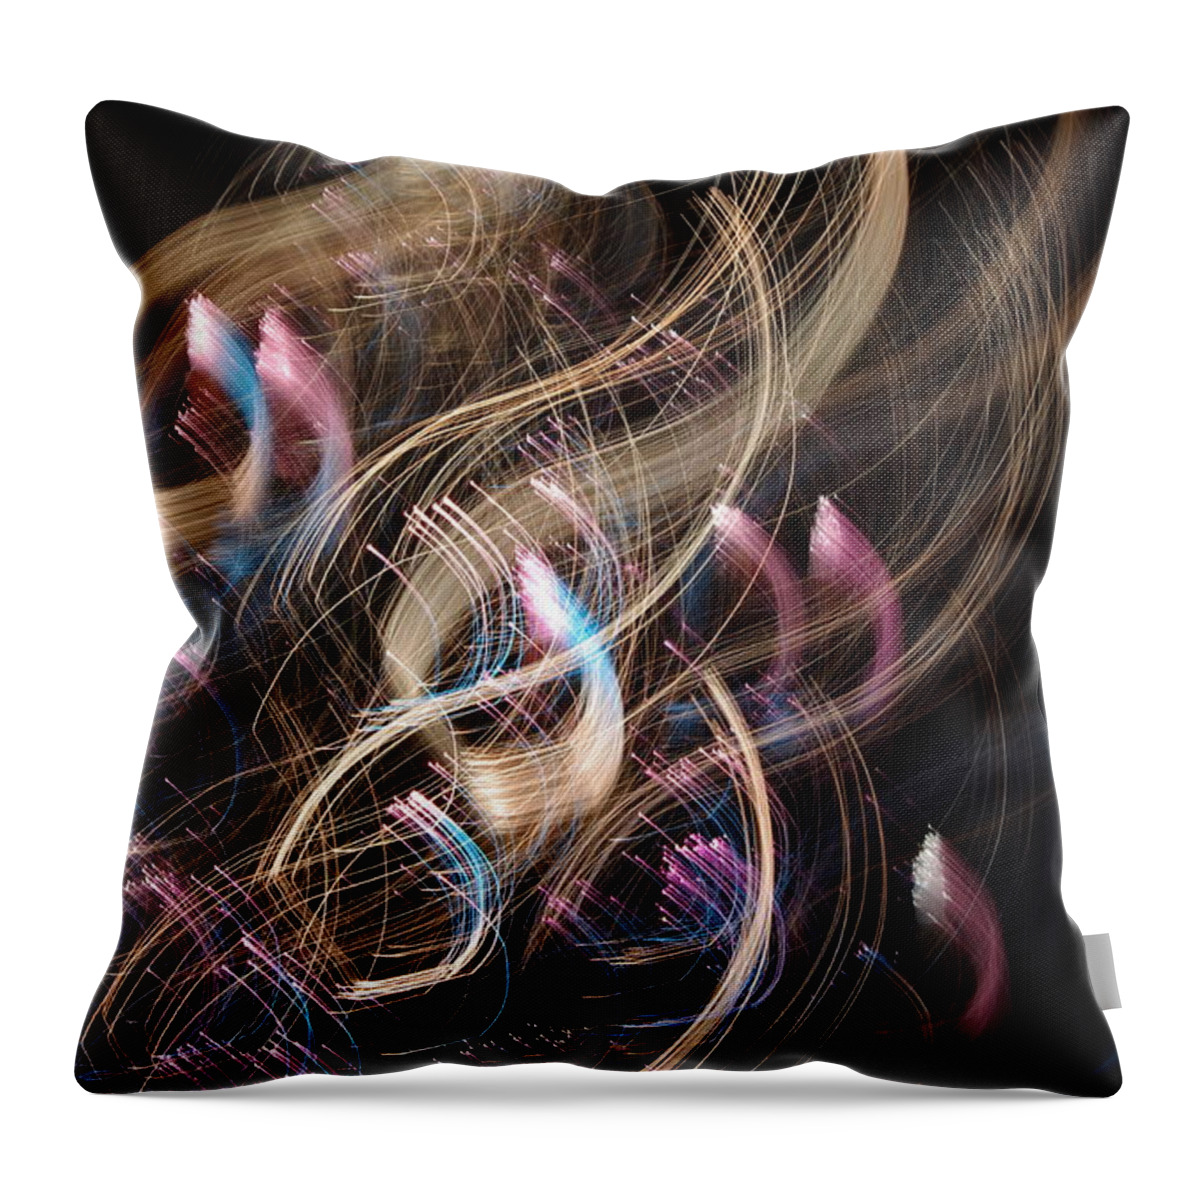 Fiber Optics Throw Pillow featuring the photograph Deco Movement by Adria Trail